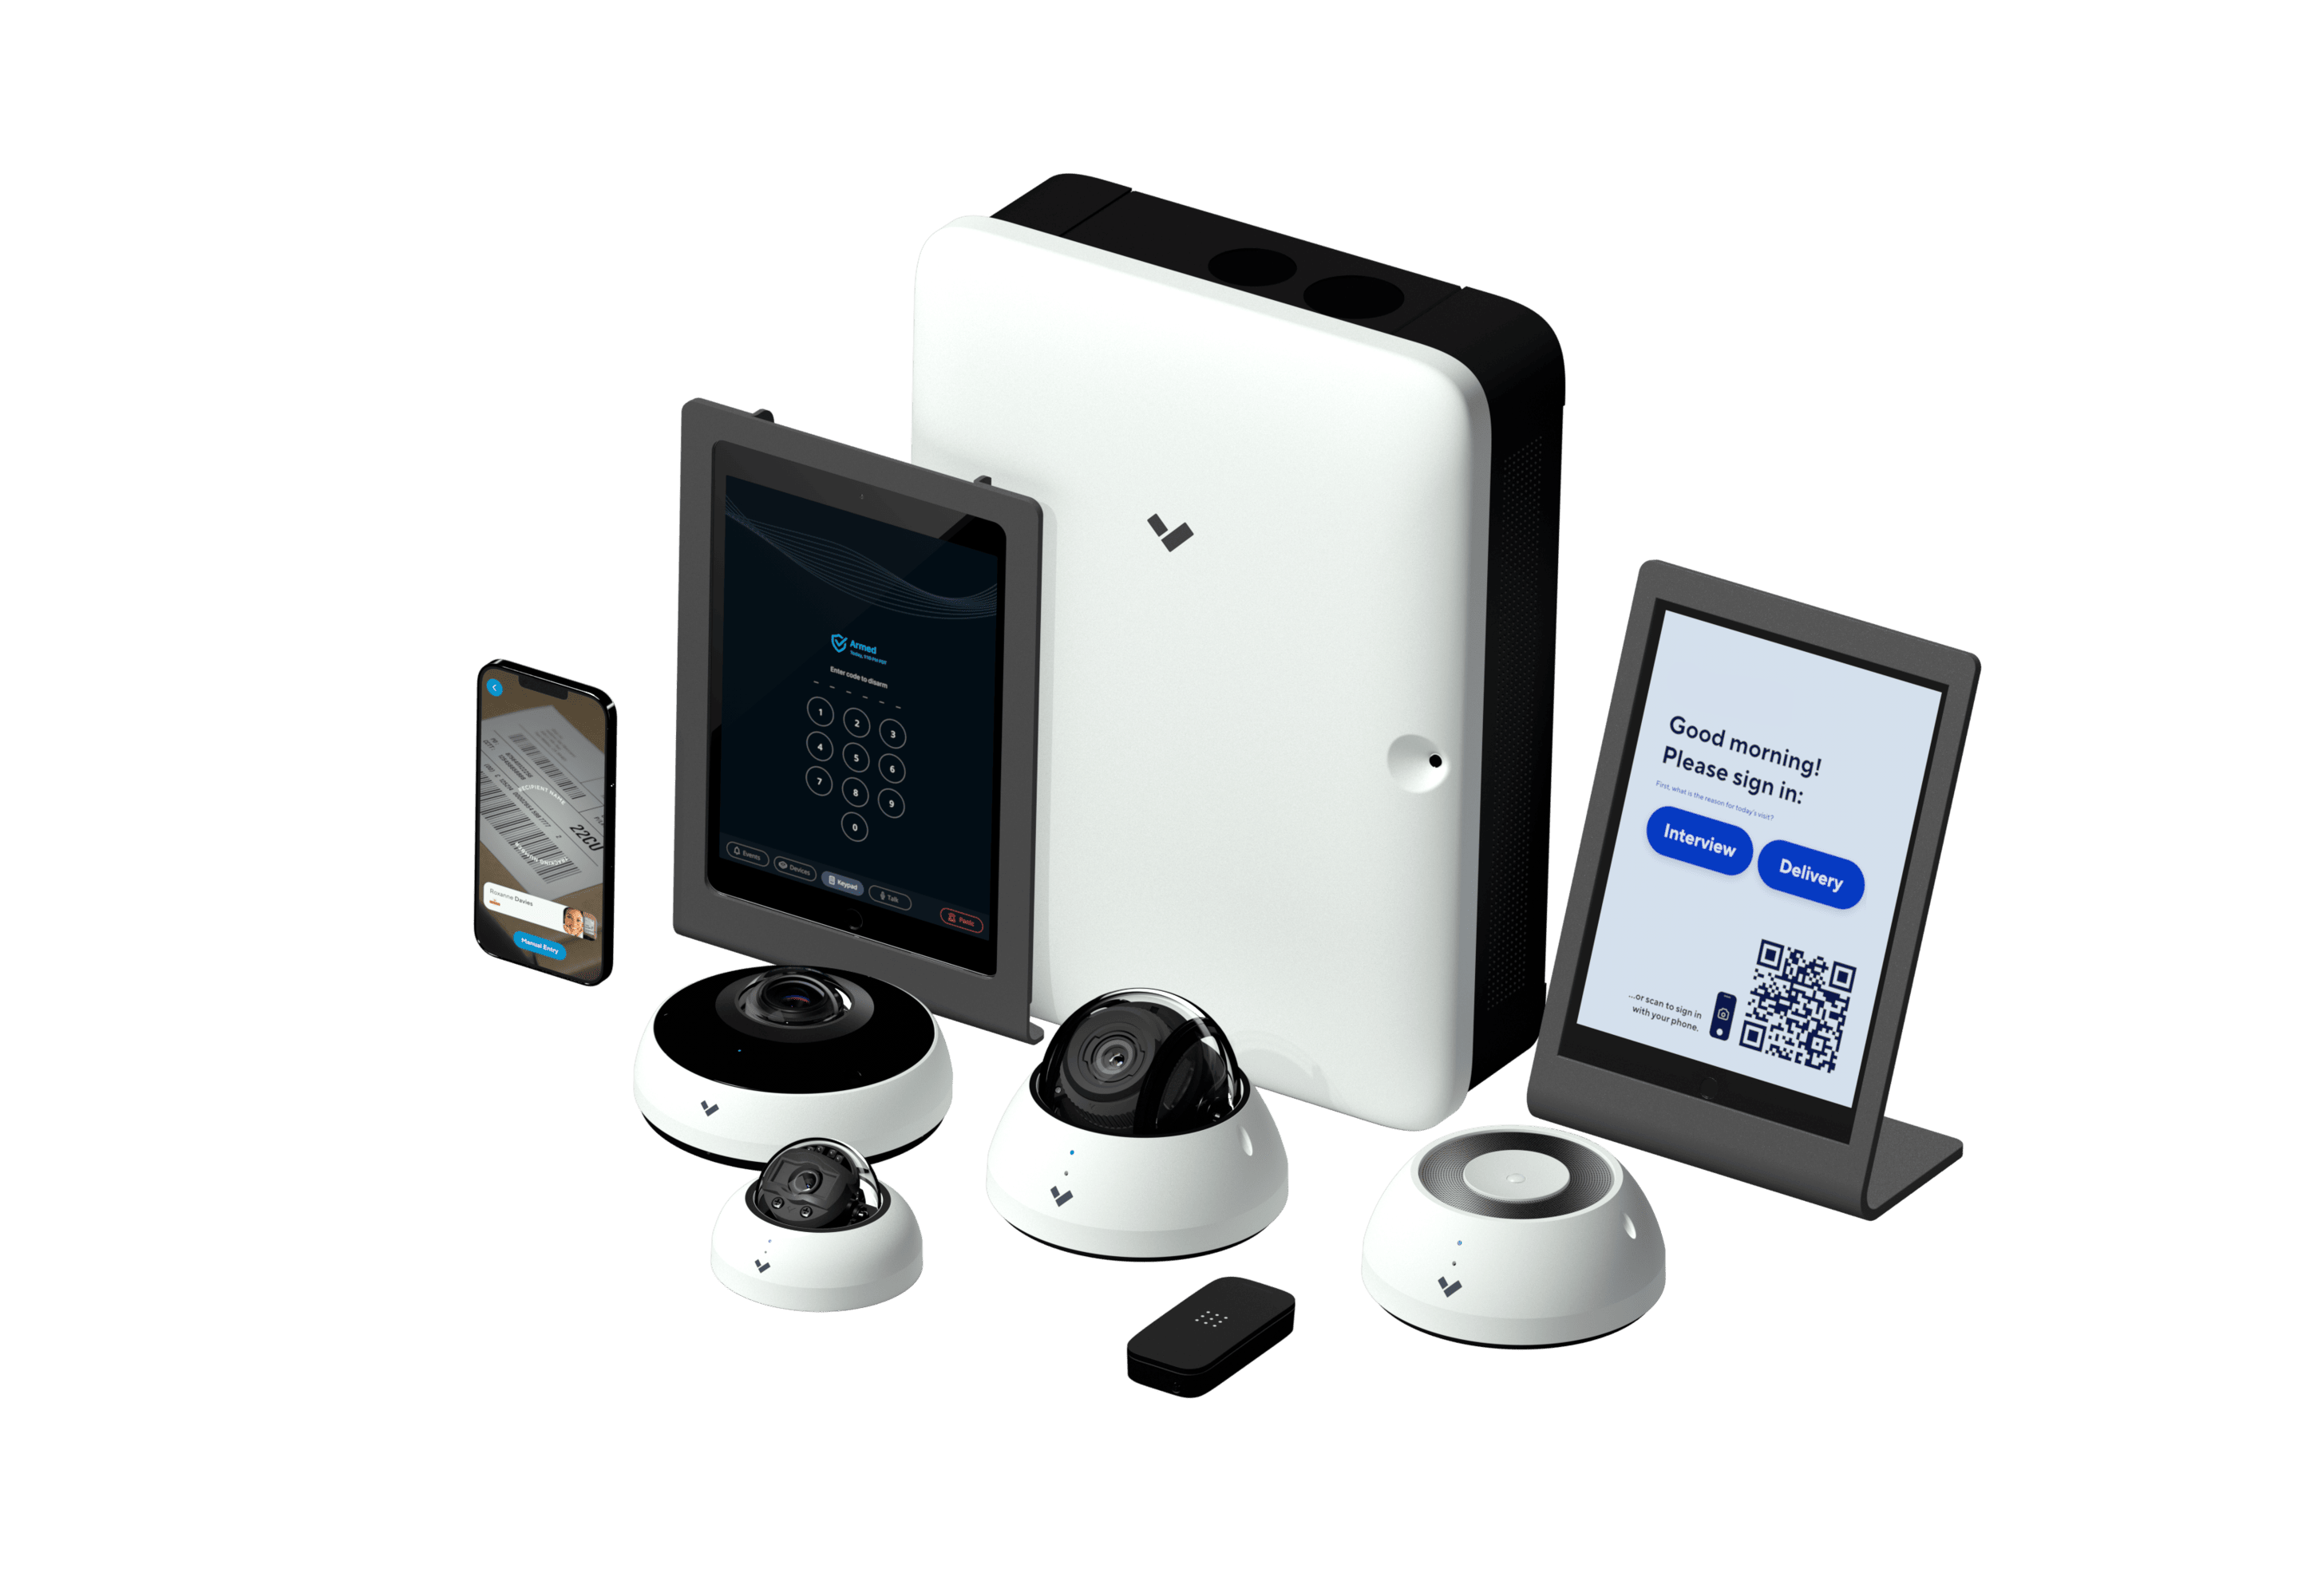 Verkada device family for security systems in Los Ángeles